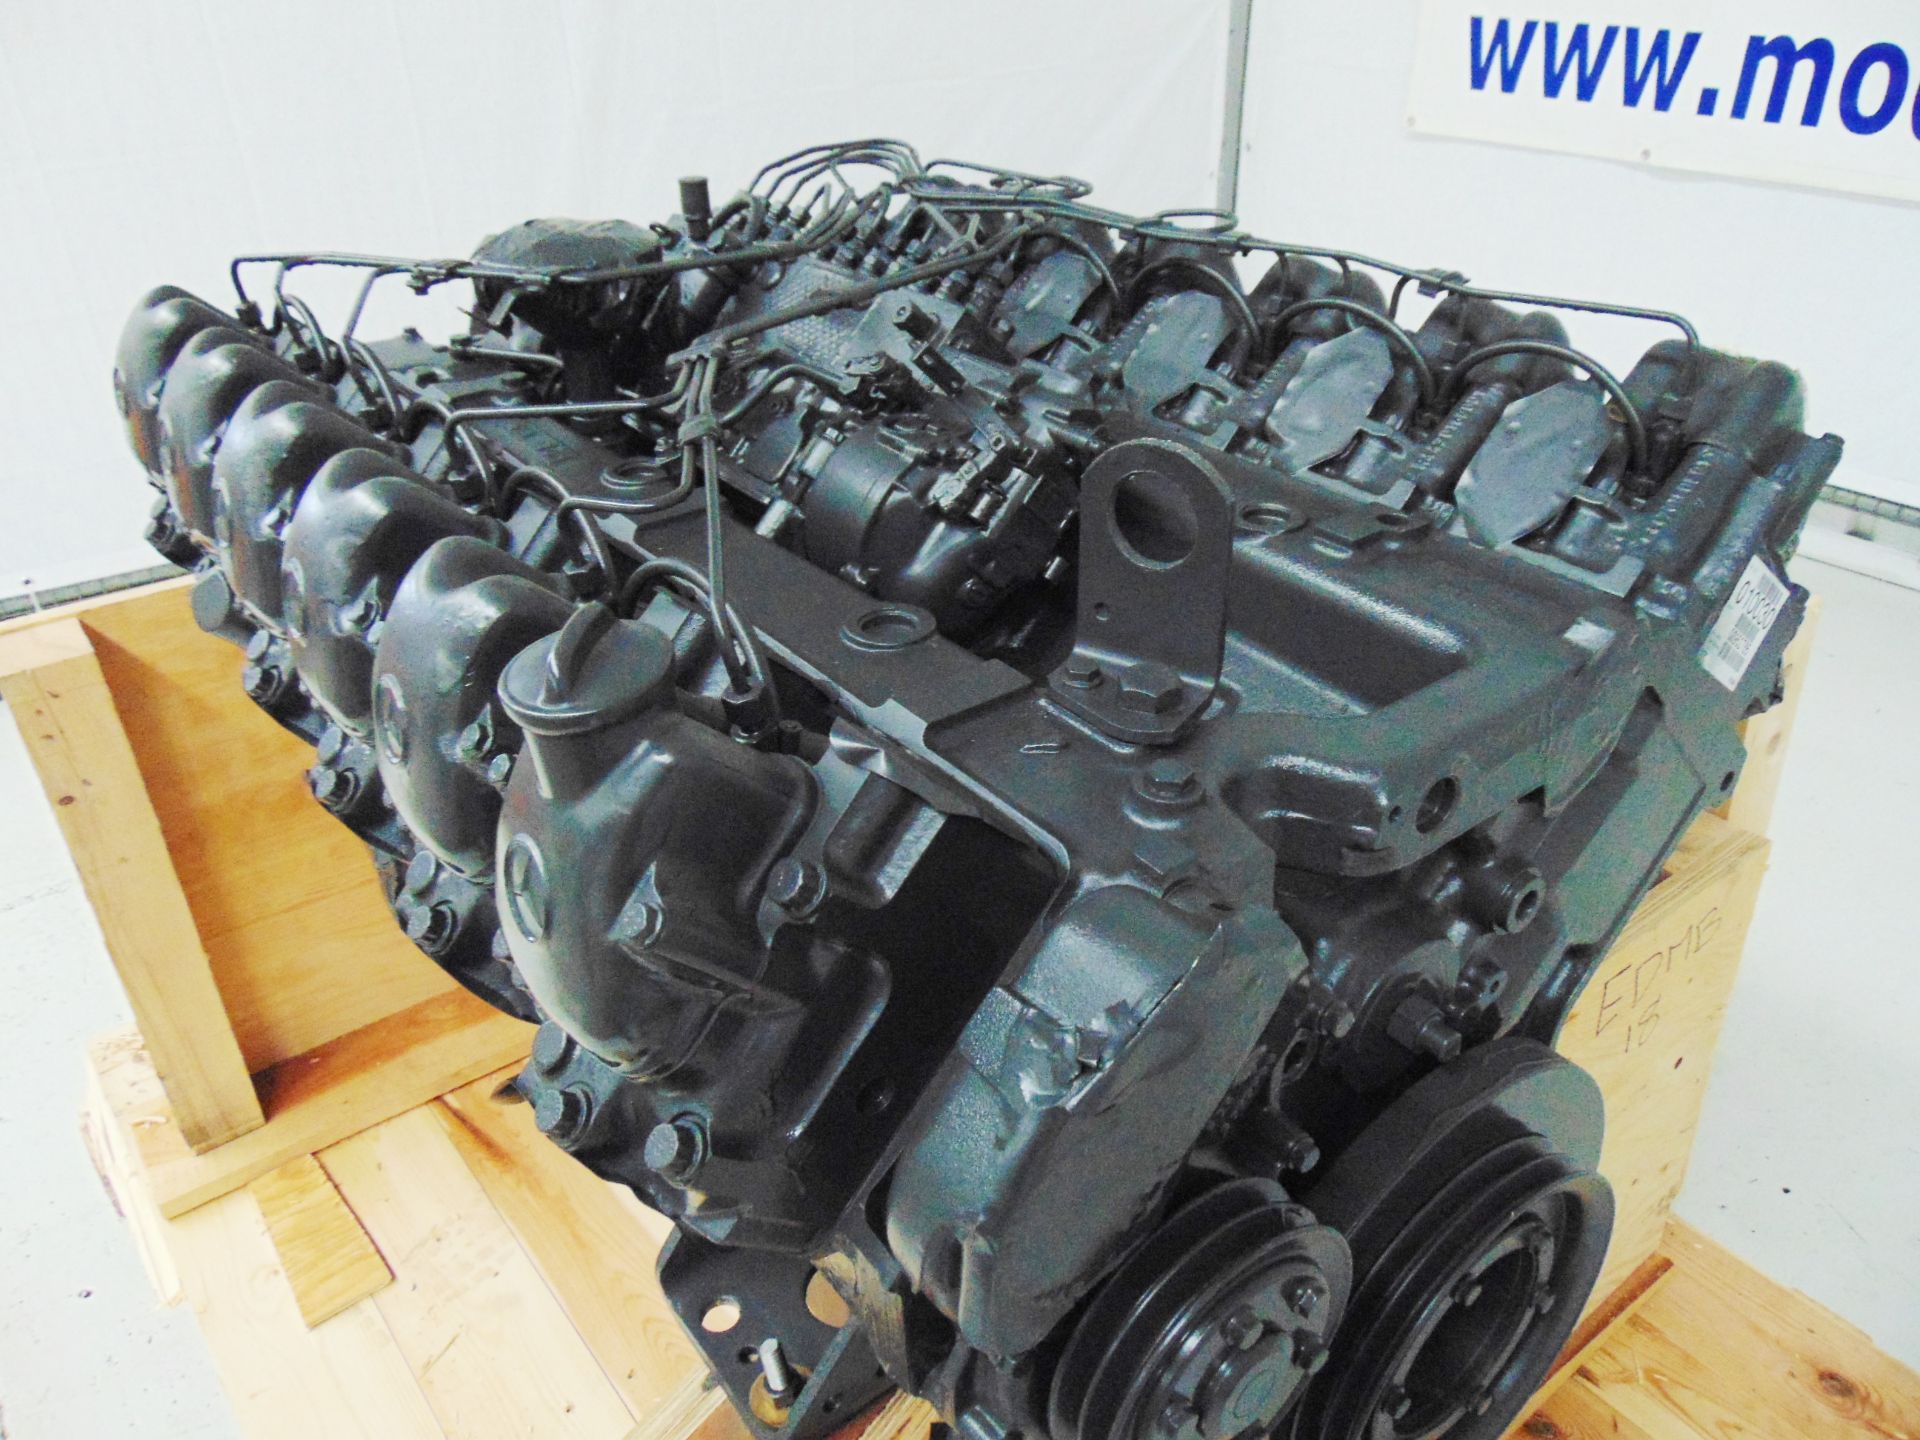 Factory Reconditioned Mercedes-Benz OM424 V12 Turbo Diesel Engine - Image 10 of 34